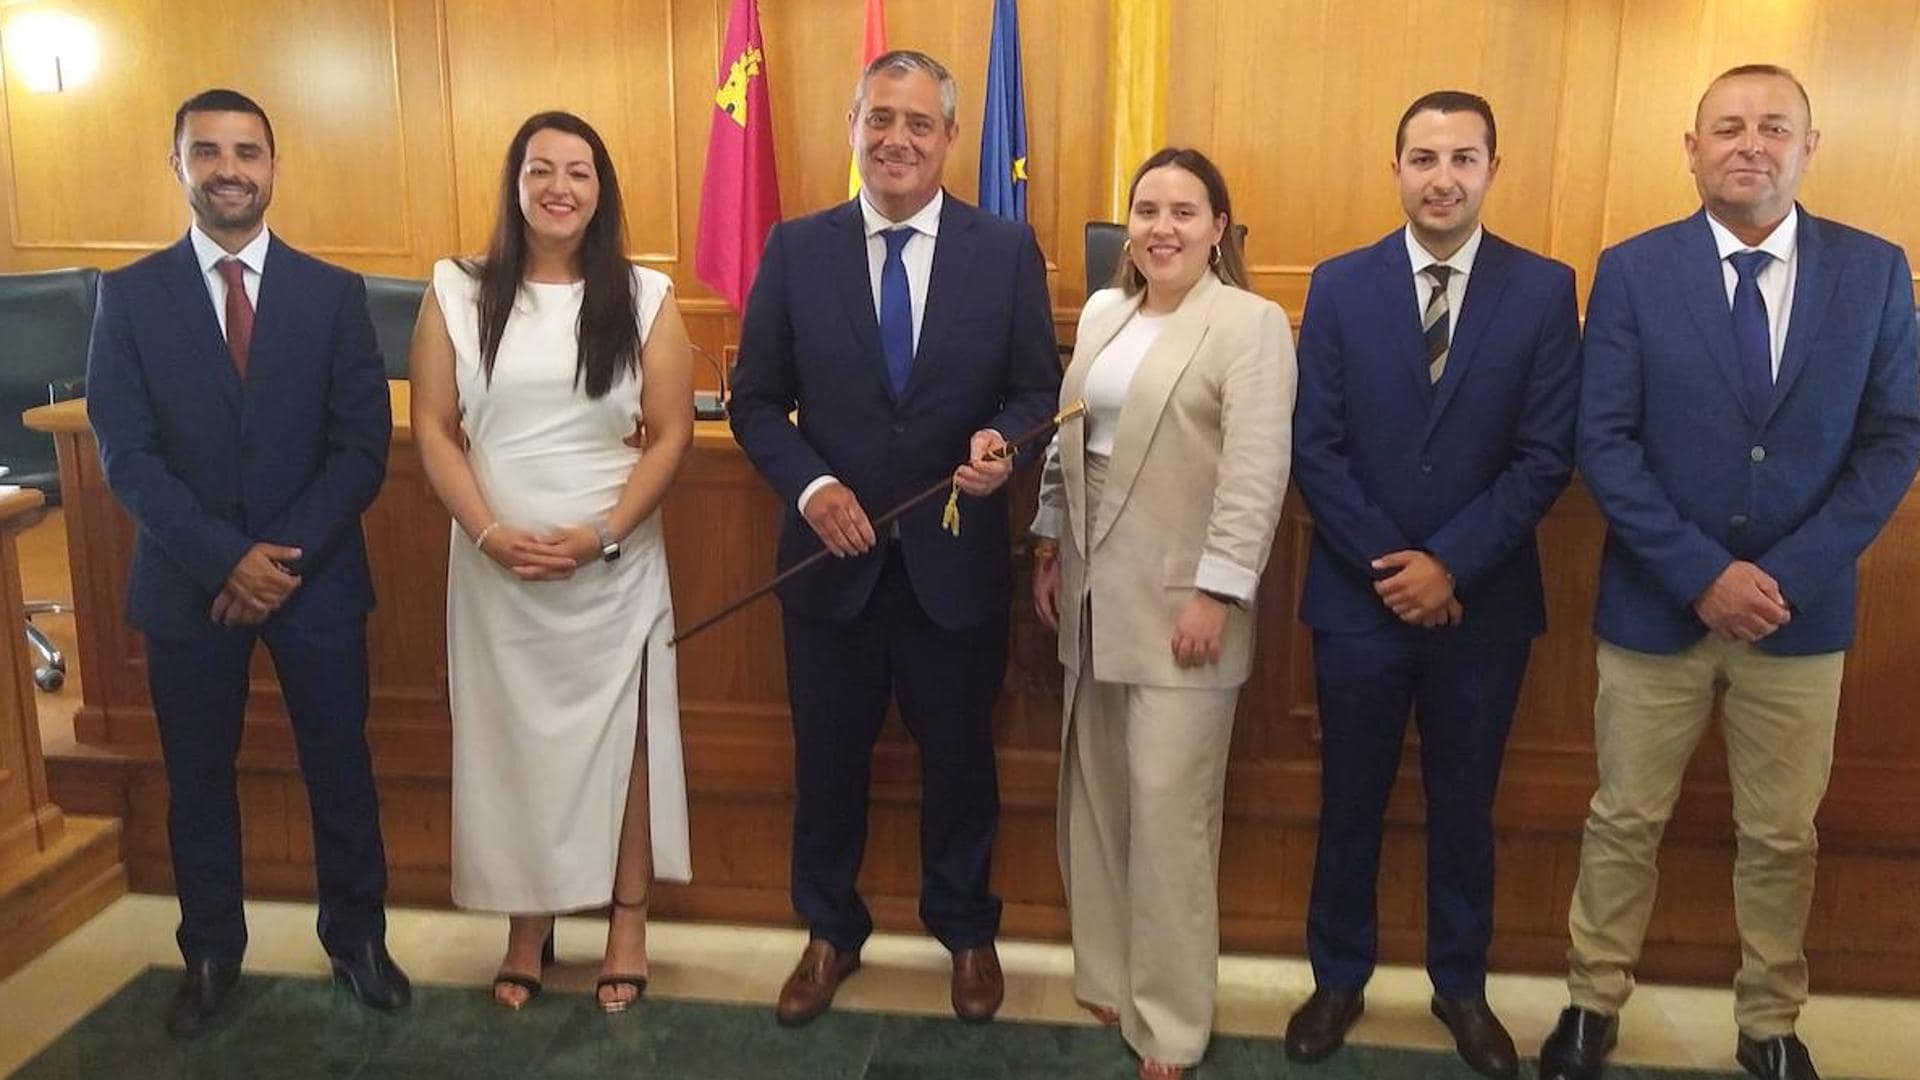 Antonio Huéscar repeats in Pliego and is committed to promoting tourism